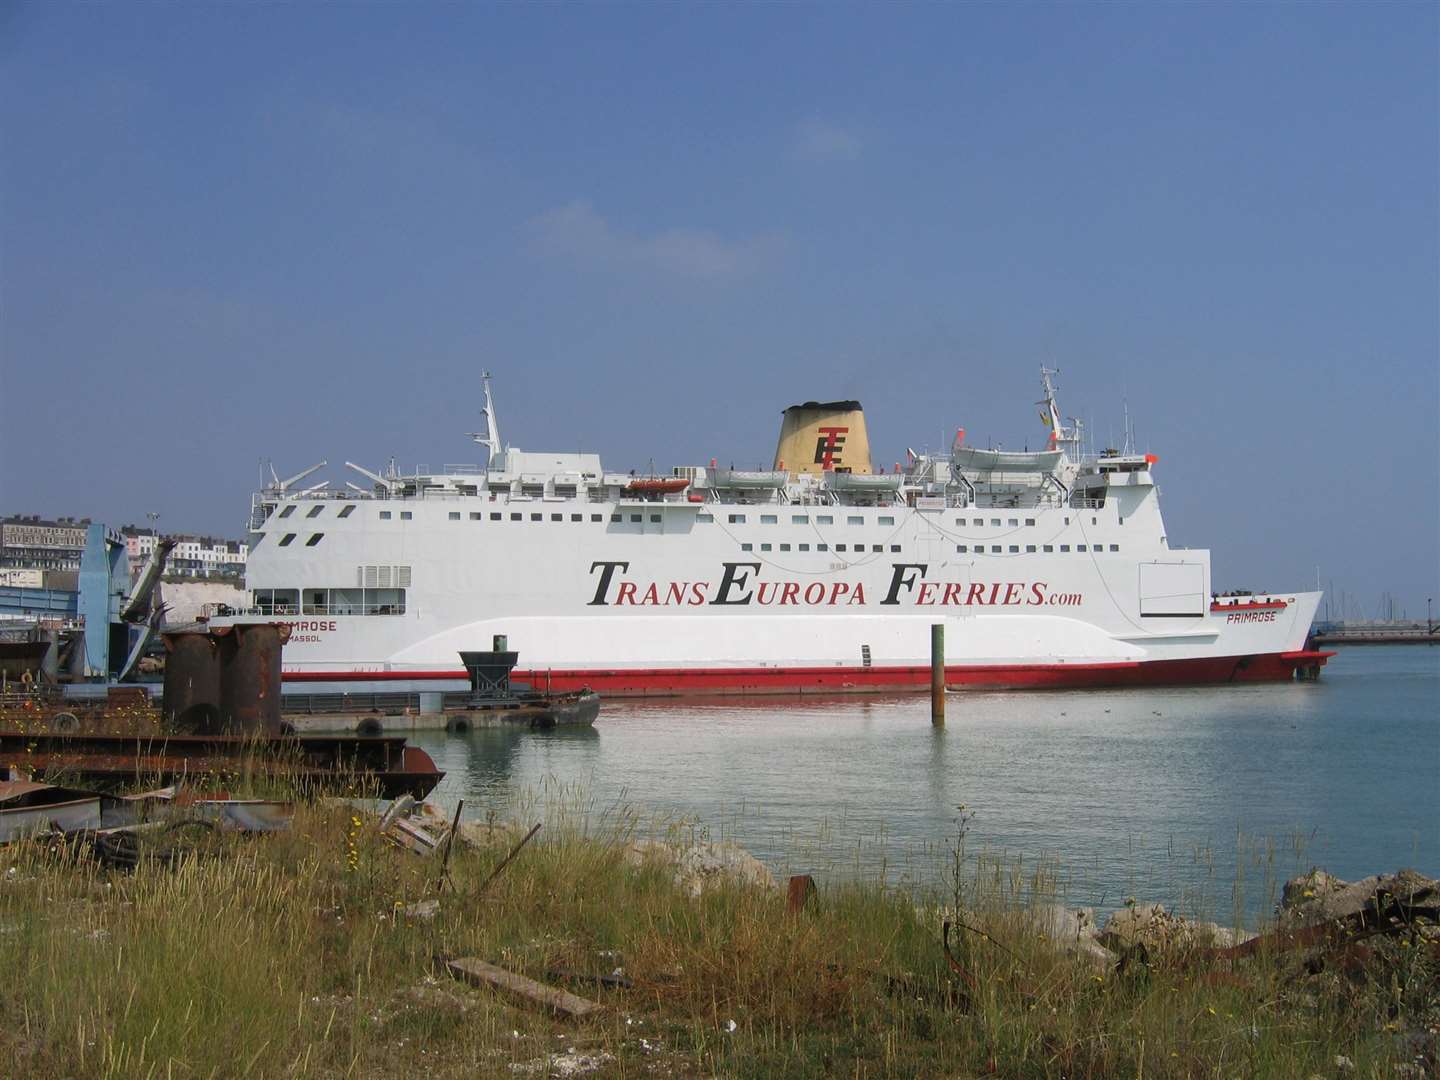 TransEuropa ferry berthed in the Port of Ramsgate. Funding has been cut to keep the port ready for ferries (7091021)